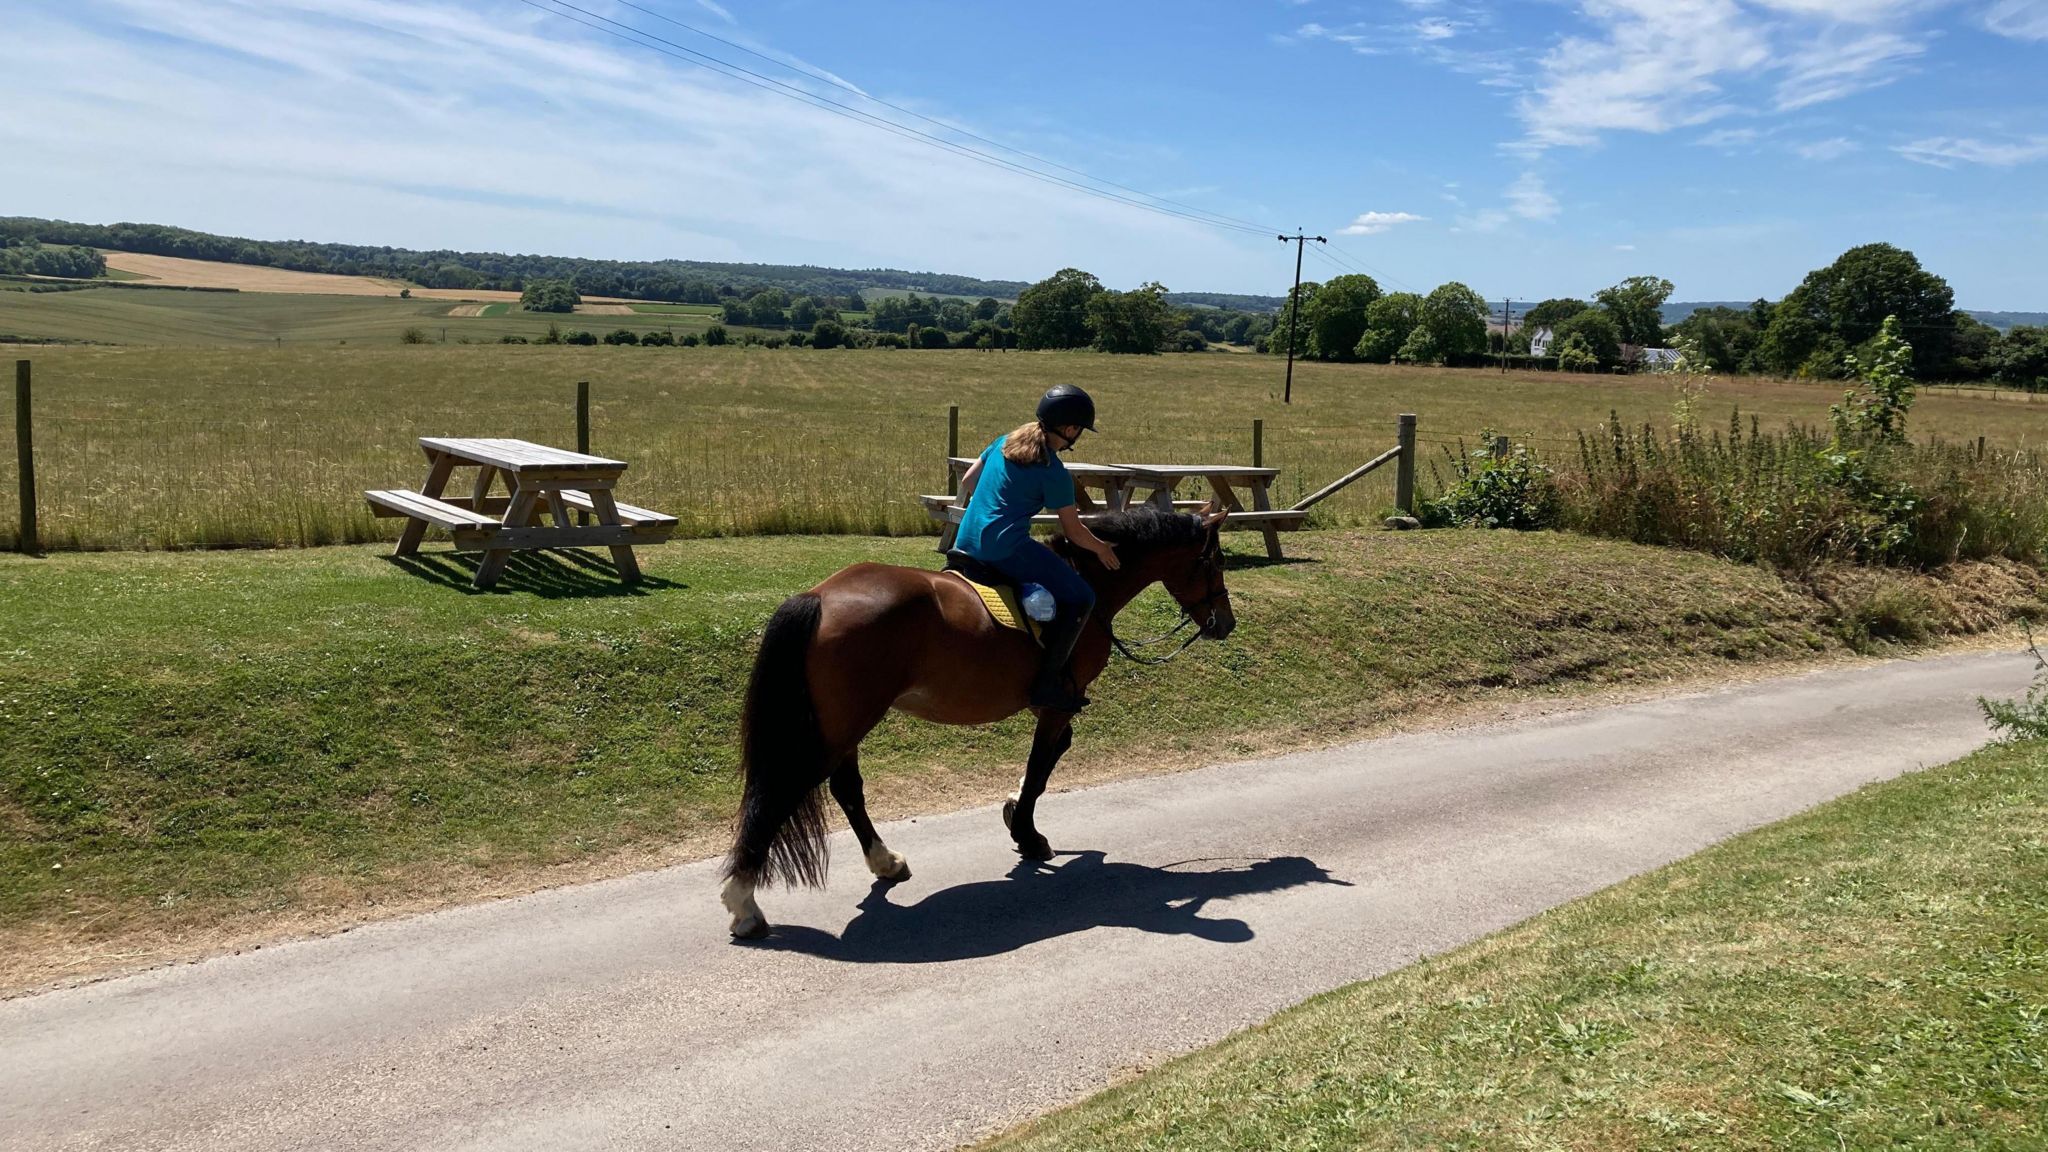 THURSDAY - A woman riding a brown horse on a country lane. The horse is brown and the woan, wearing a blue tshirt and a helmet is stroking its neck. The road is single-track and has grass banks on each side. There are two picnic benches on the bank to the left of the road. Behind there is a field of grass and rolling countryside under a blue sky.